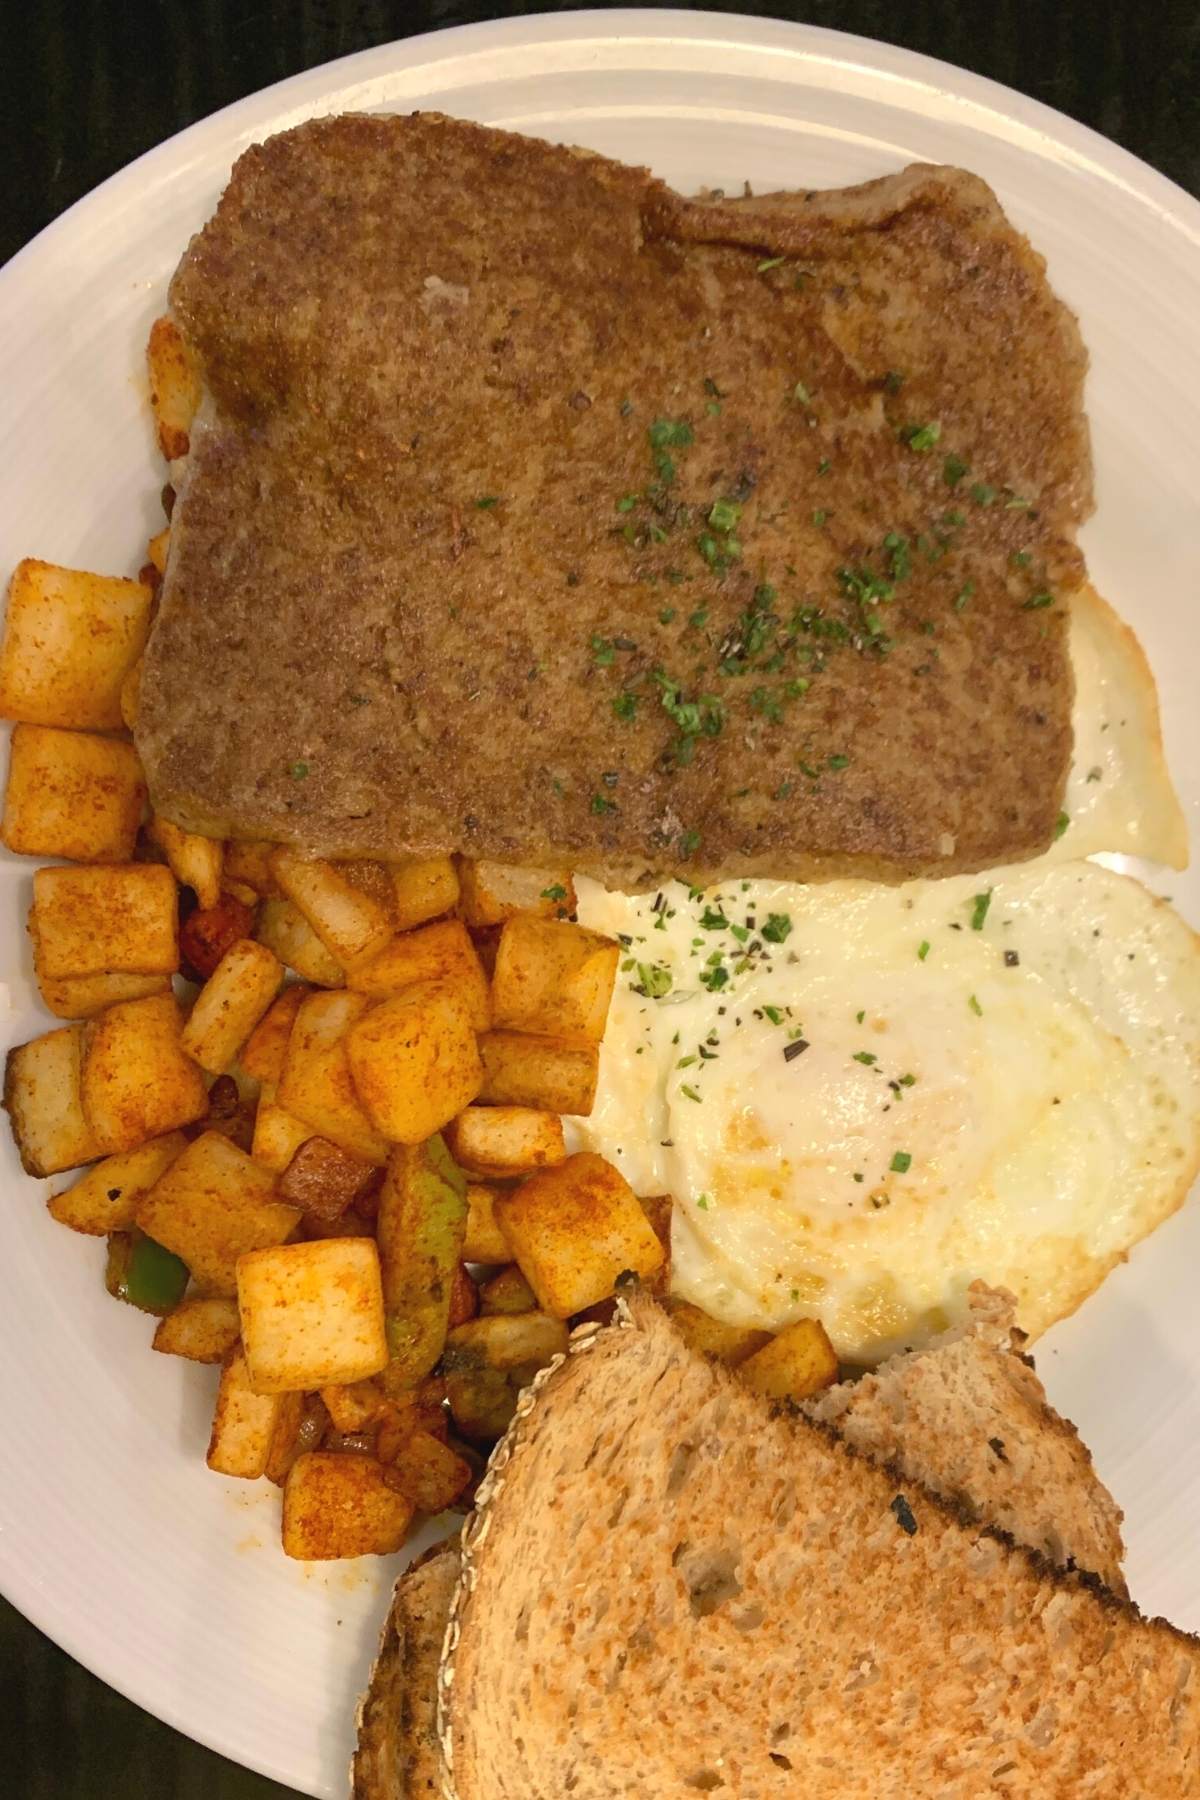 A slice of scrapple served for breakfast with eggs and toast